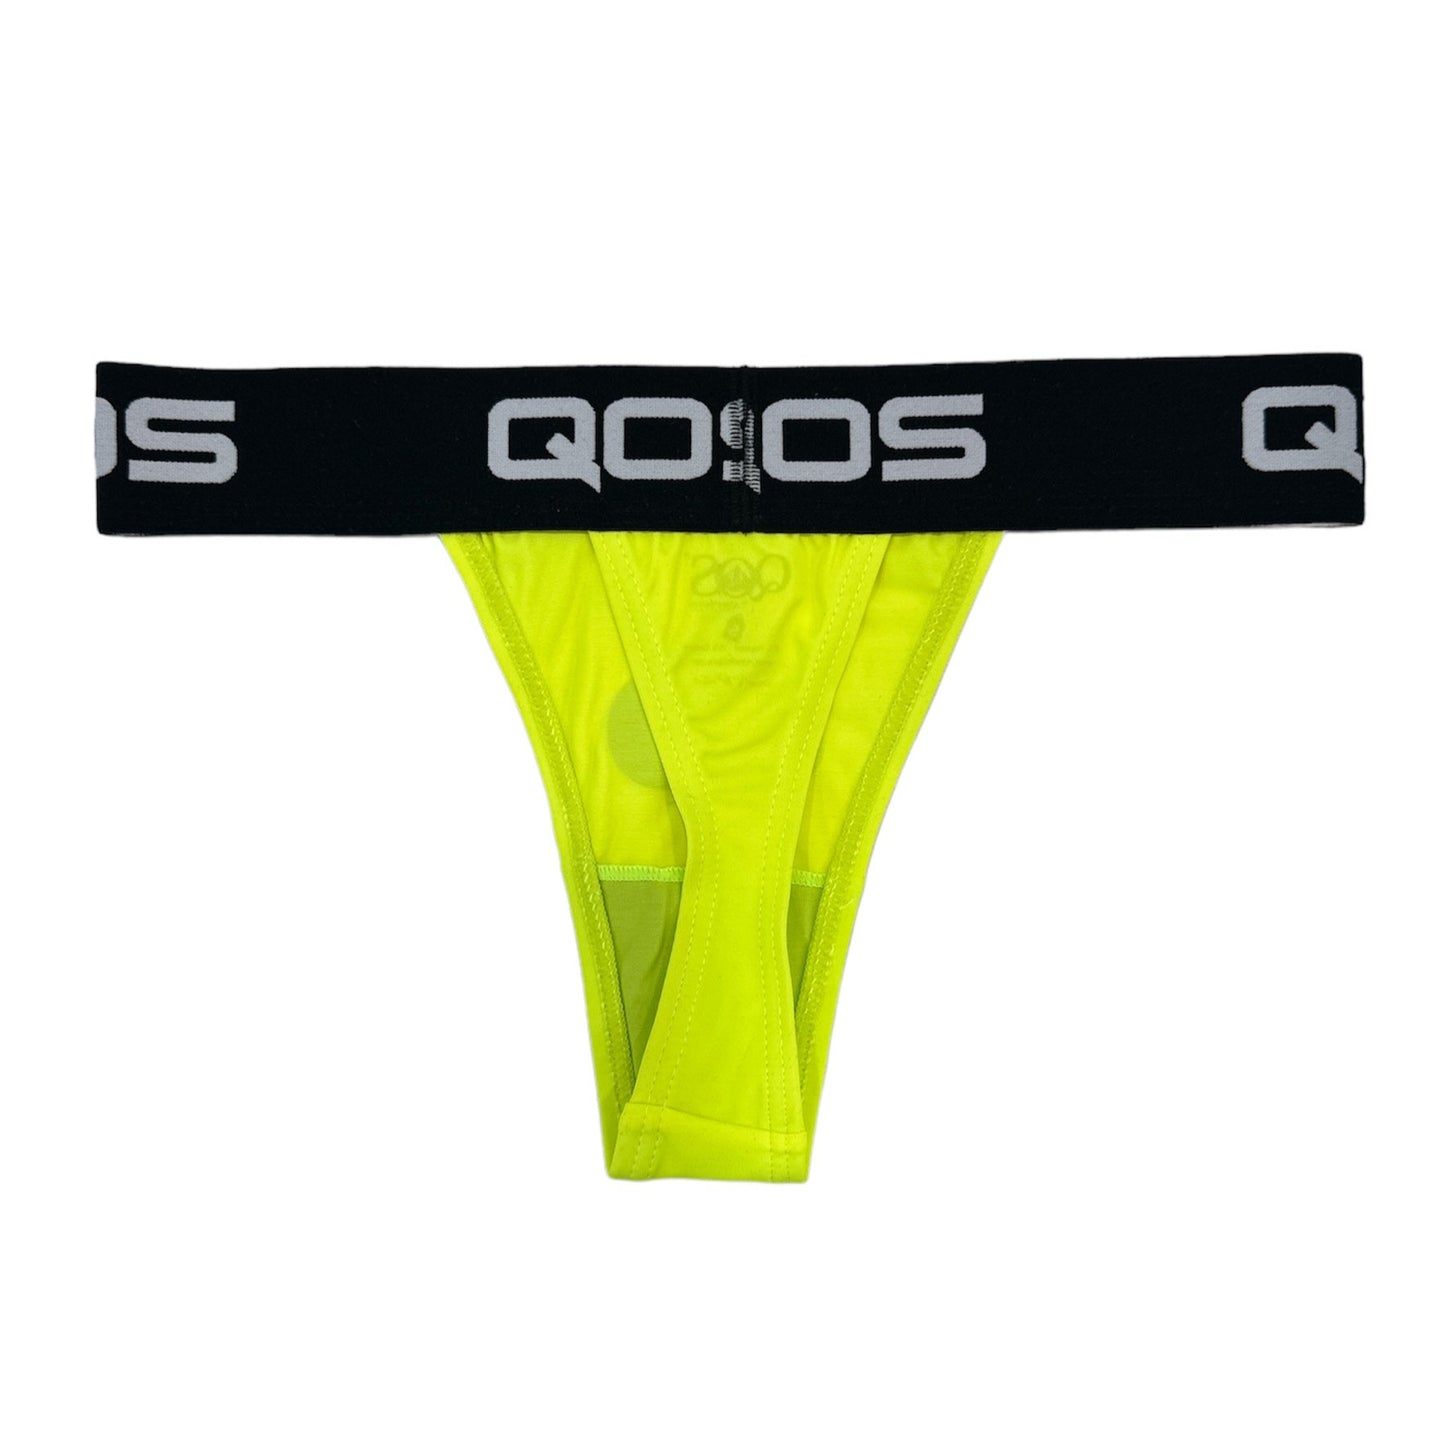 Neon Yellow Iconic QOS Brand- Queen Of Spades - Thong